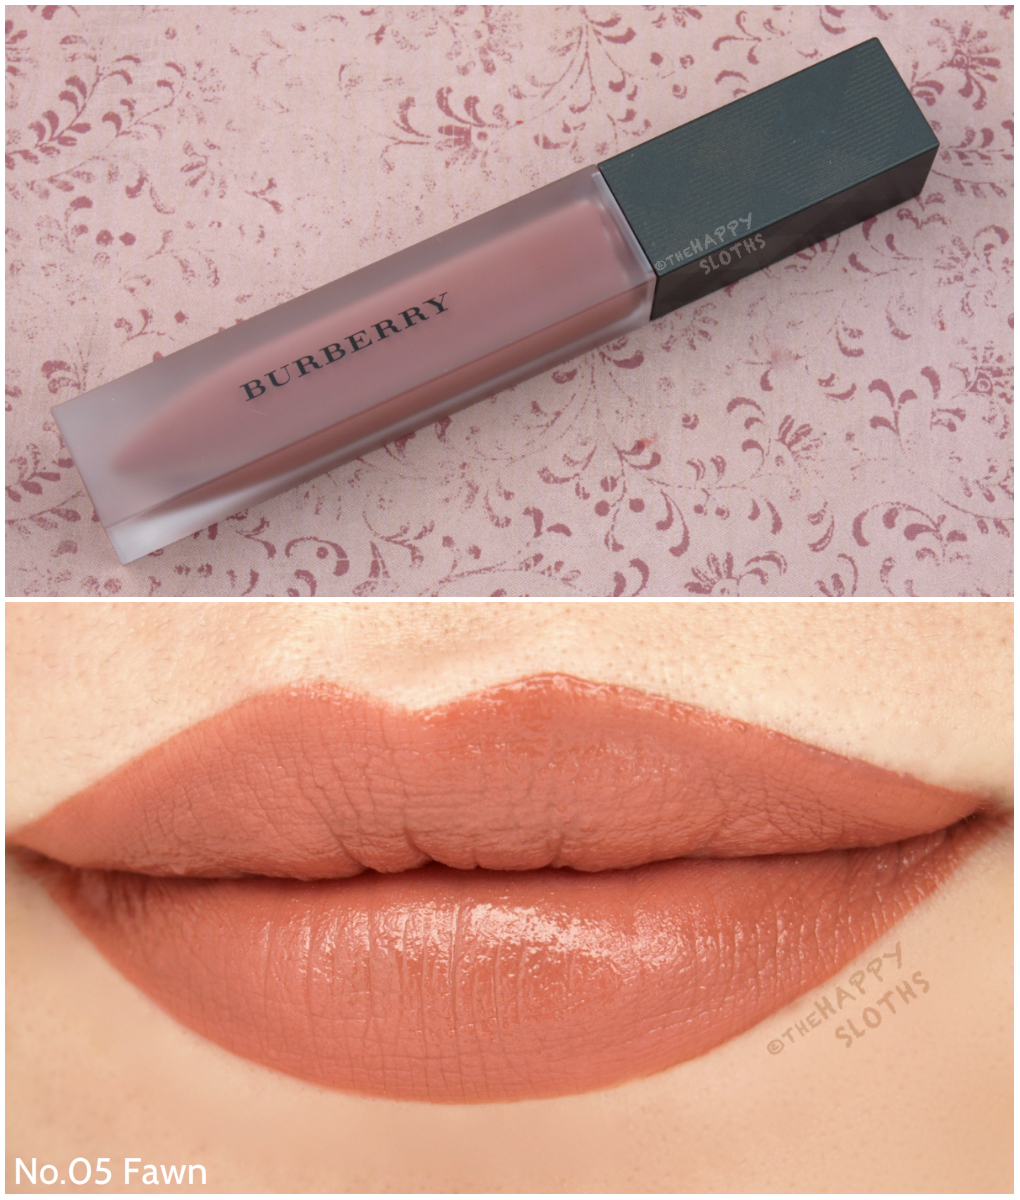 Burberry Liquid Lip Velvet Review and Swatches: No.05 Fawn